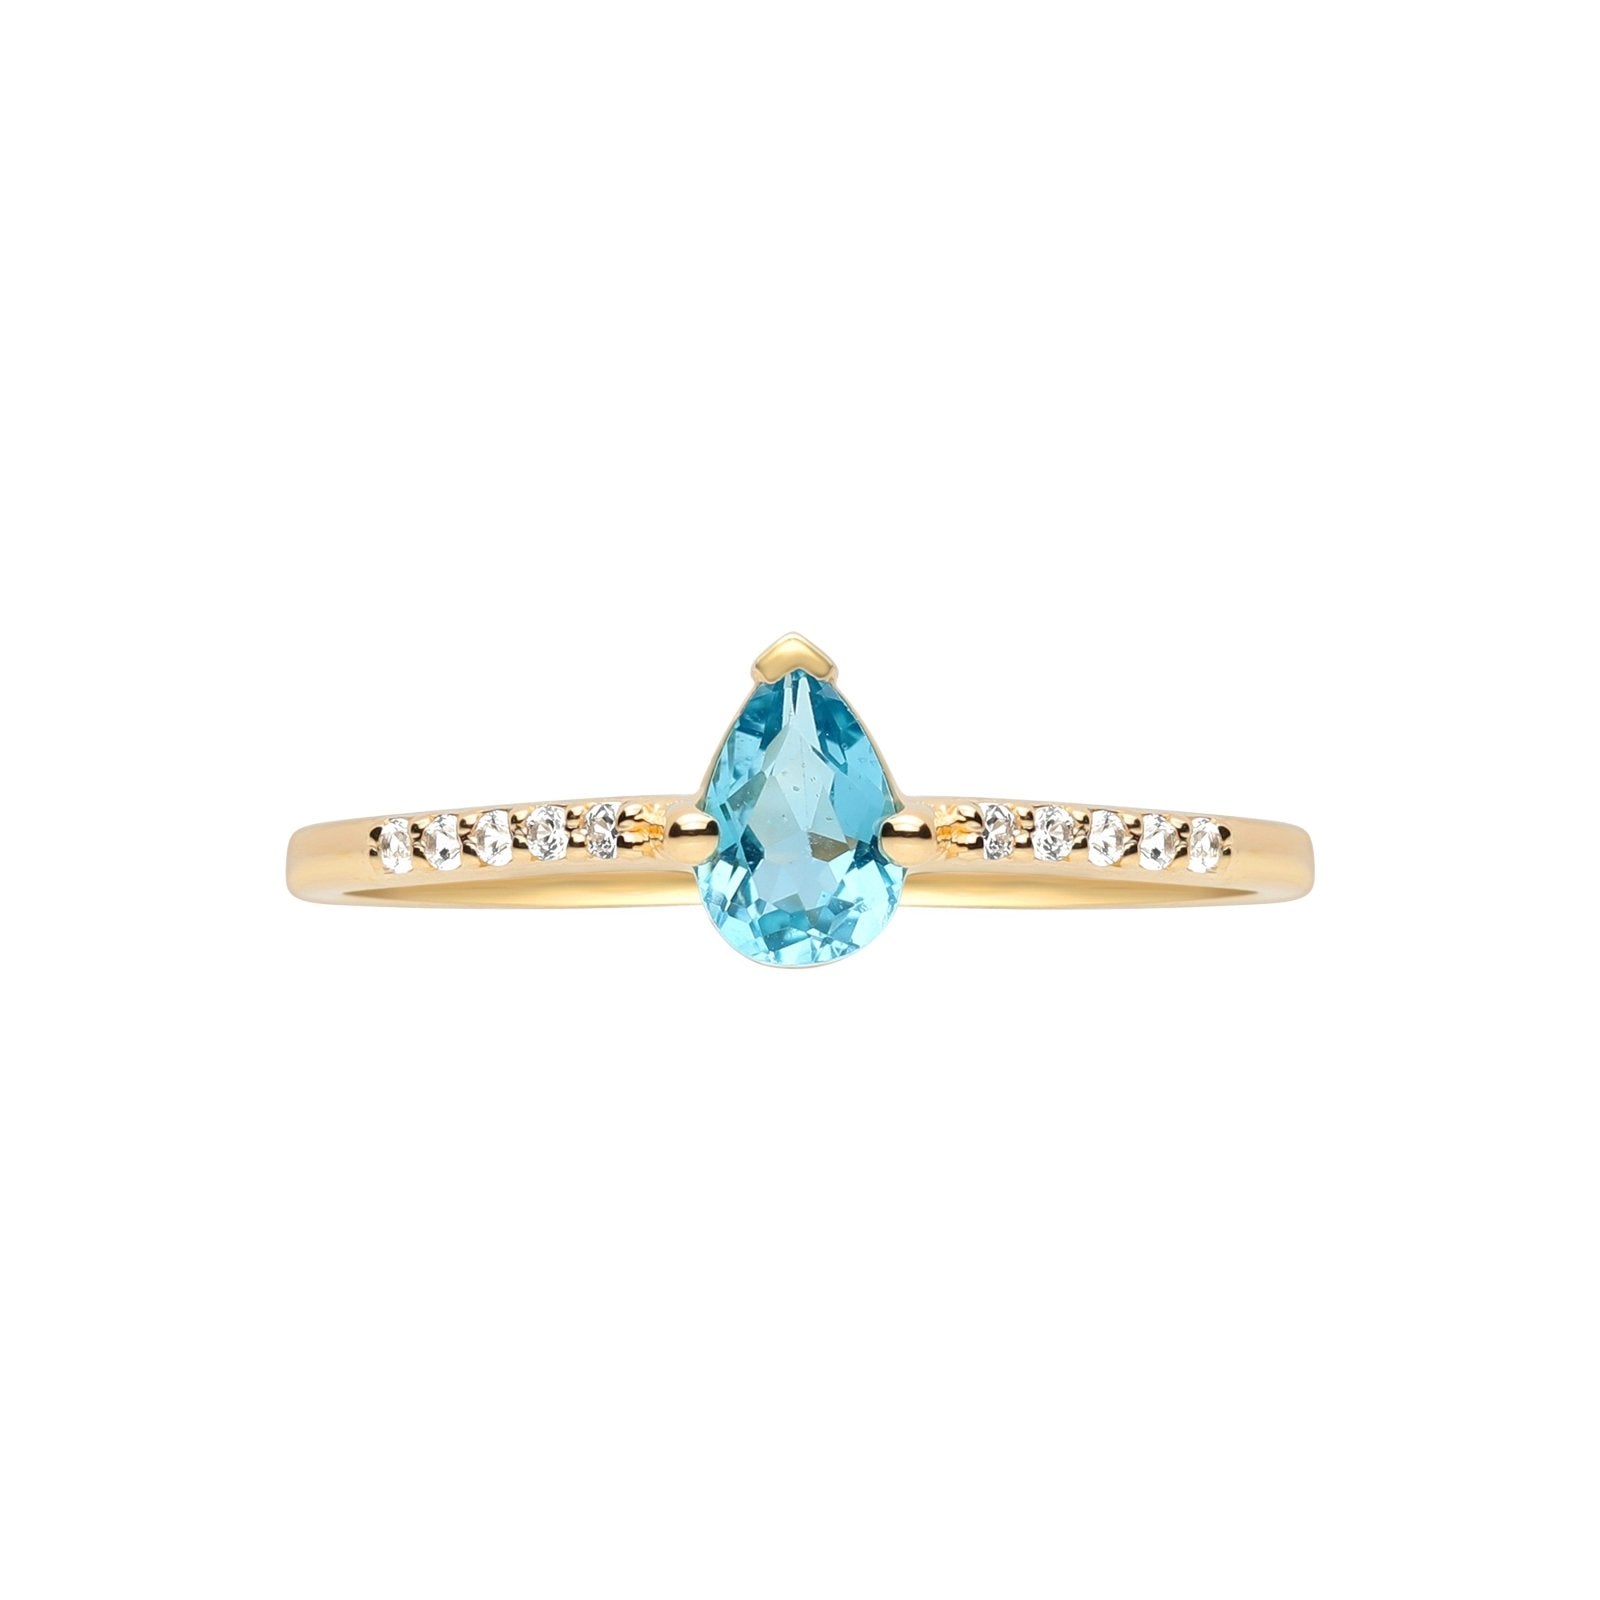 Blue Topaz Pear Set in Cubic Zirconia Studded Band Rings Estella Collection #product_description# 17768 14k Birthstone Gemstone #tag4# #tag5# #tag6# #tag7# #tag8# #tag9# #tag10# 6